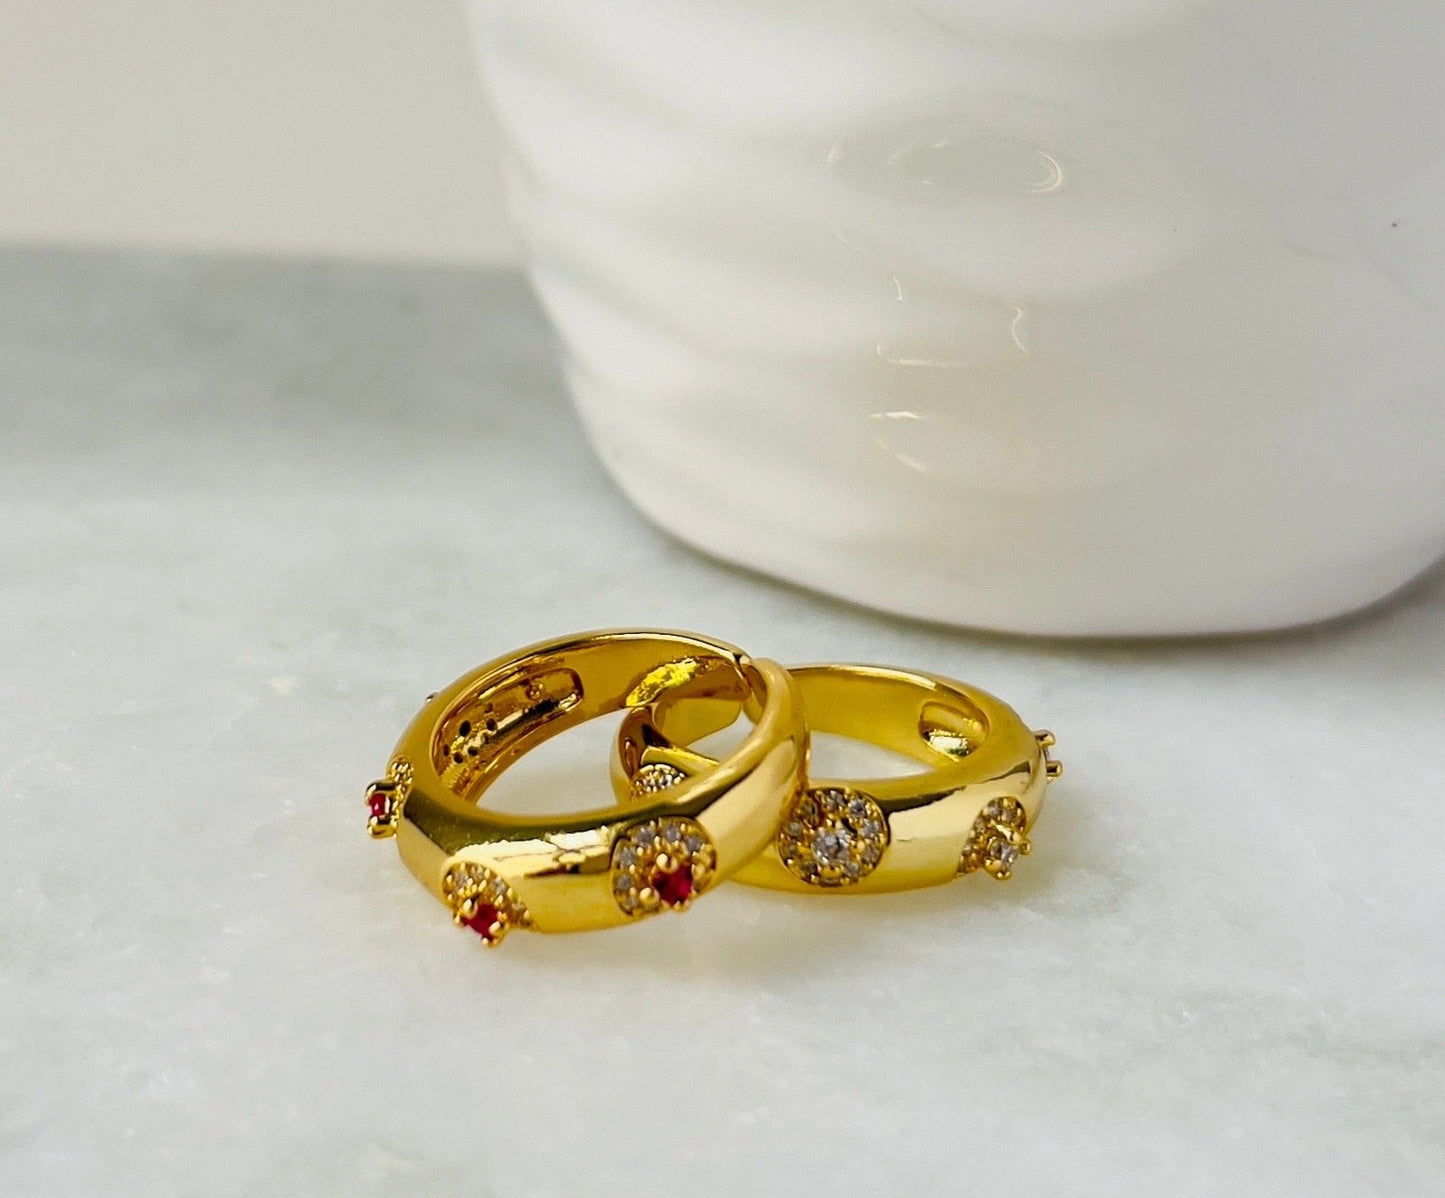 Two prima muse rings in red and silver